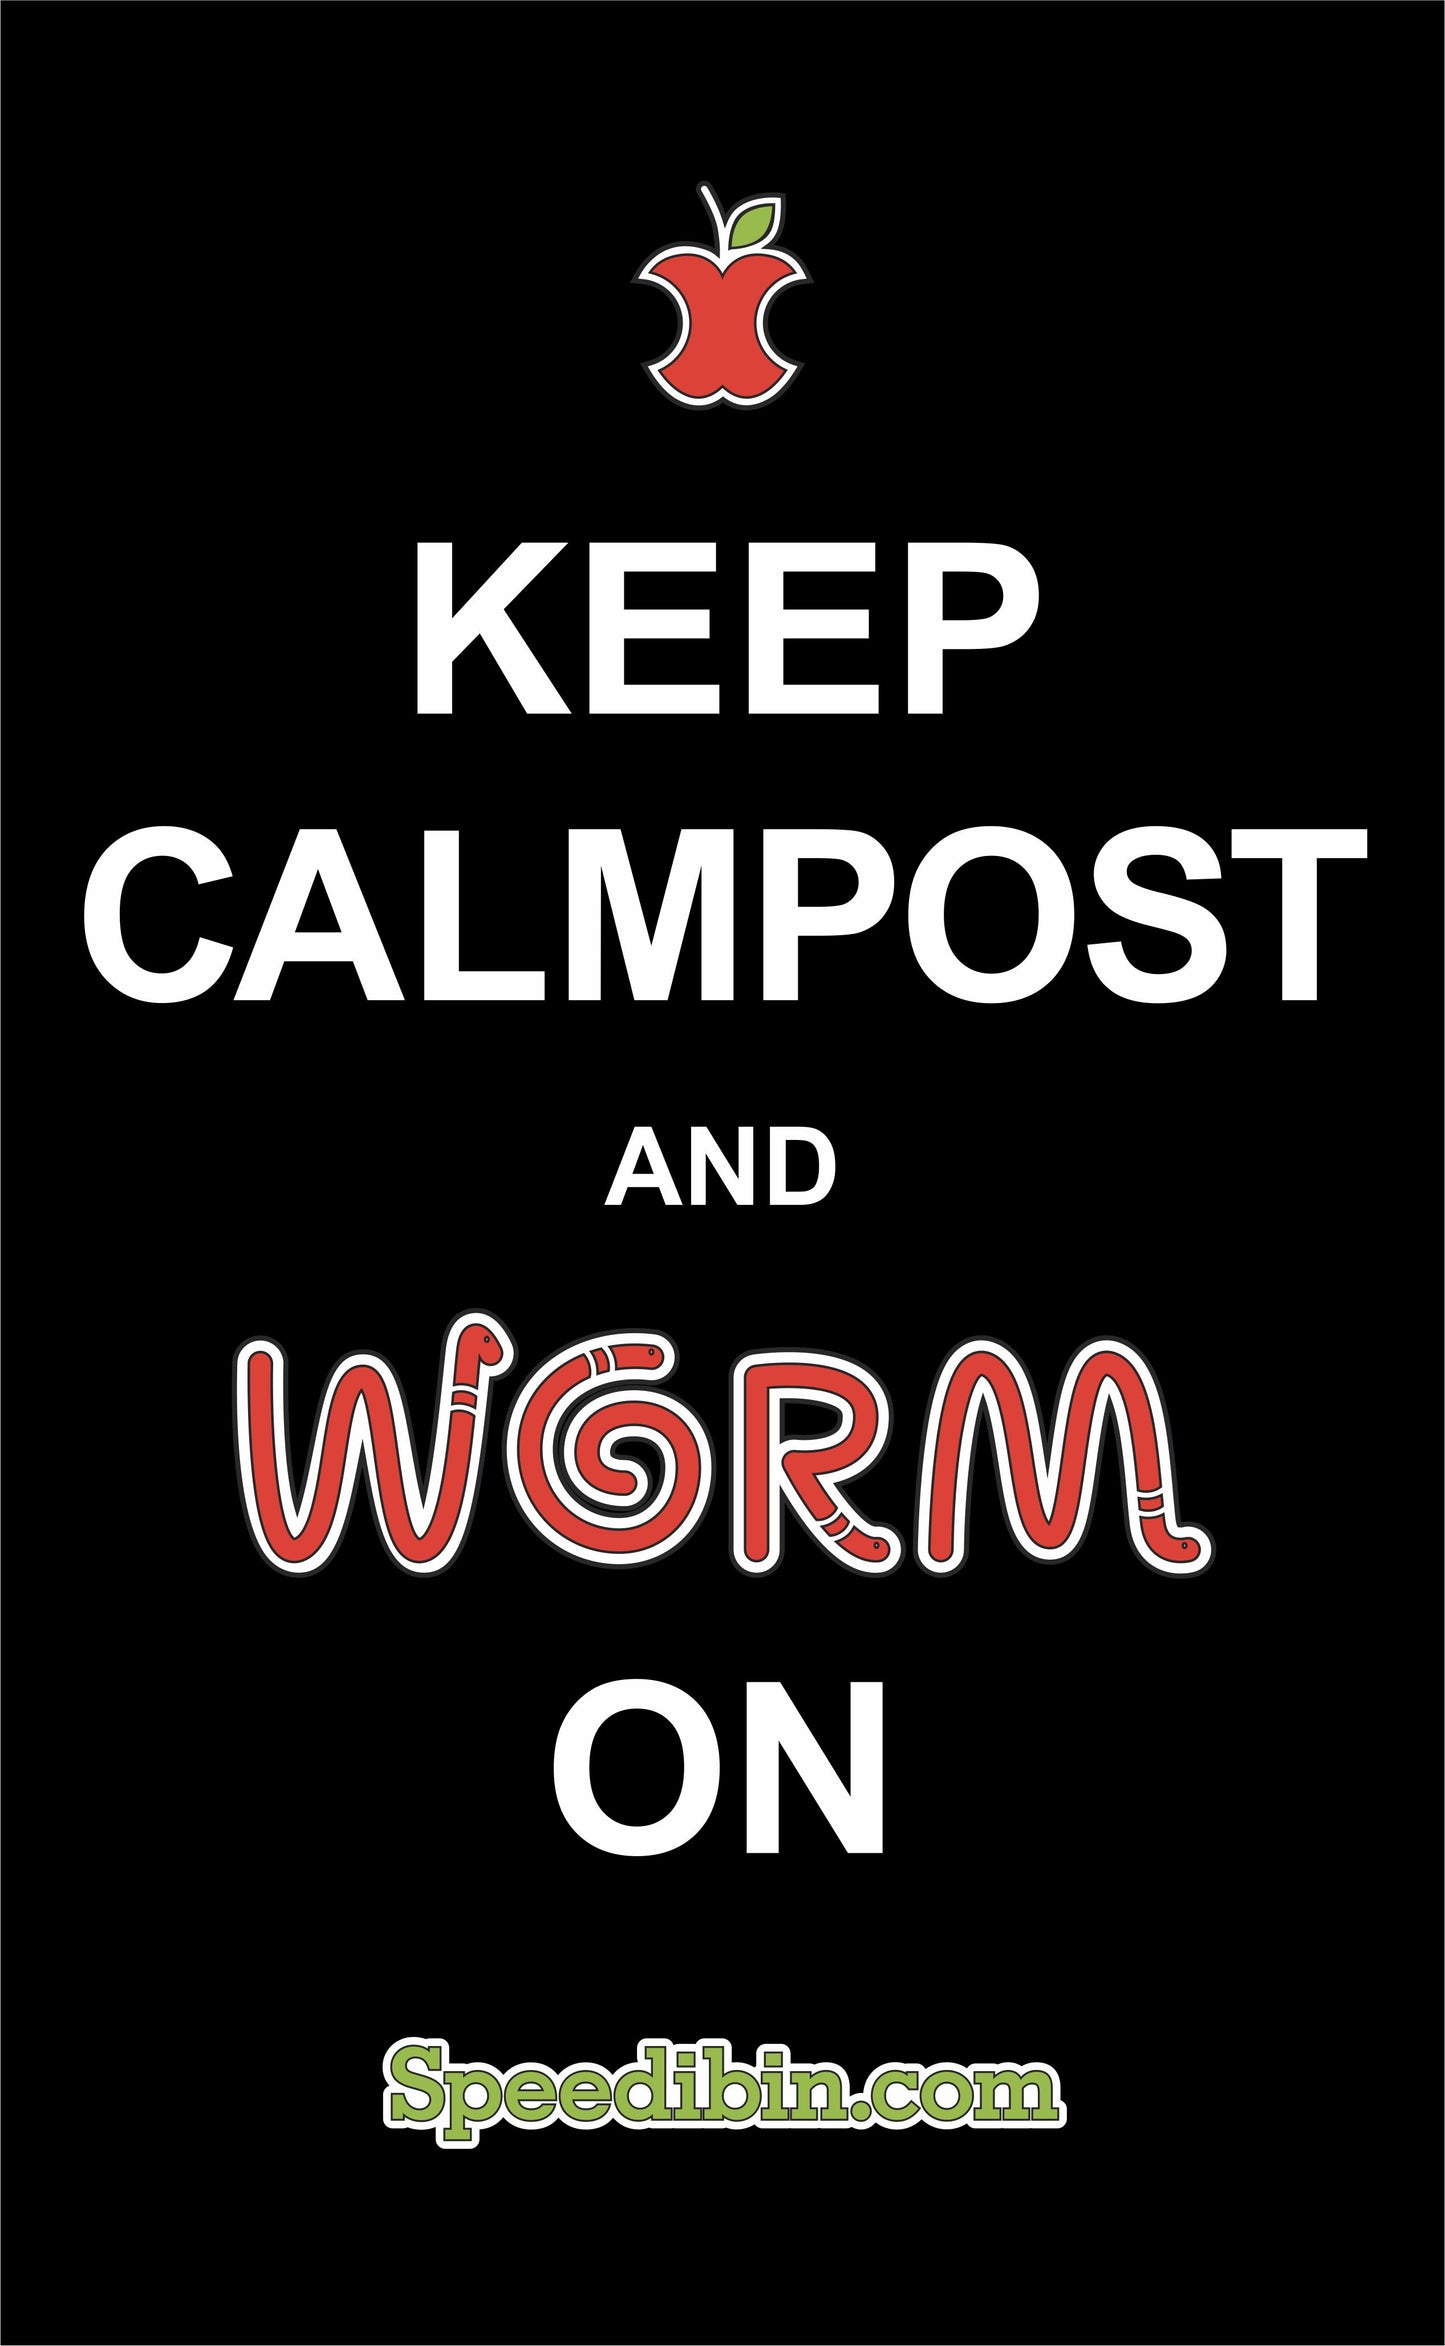 Keep Calmpost and Worm On T Shirt